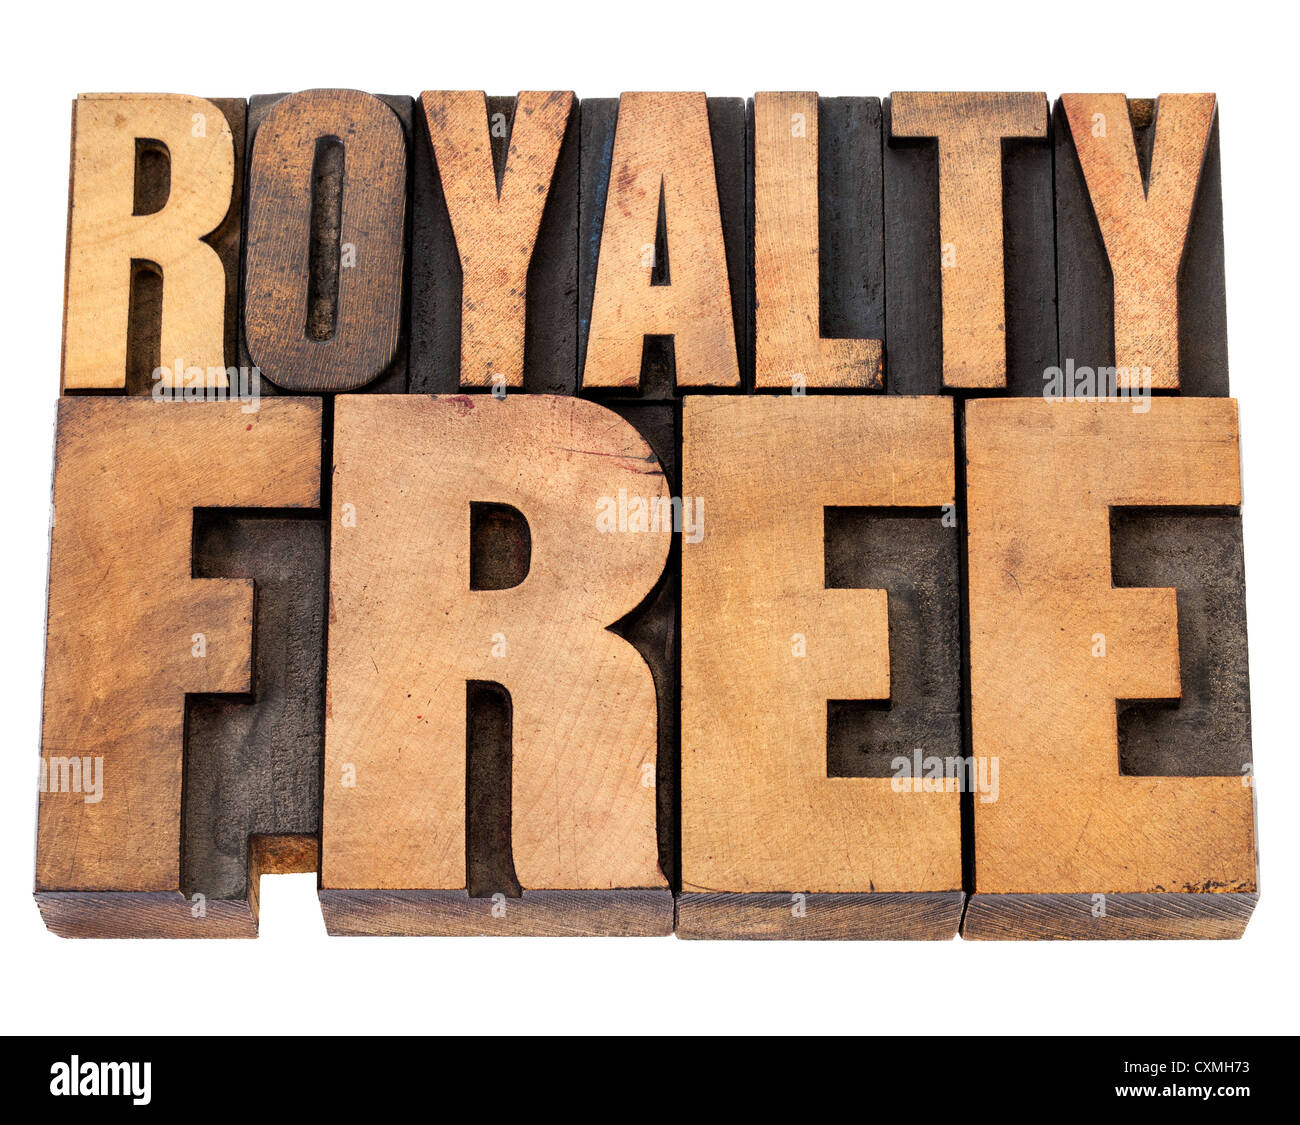 royalty free - isolated text in vintage letterpress wood type Stock Photo